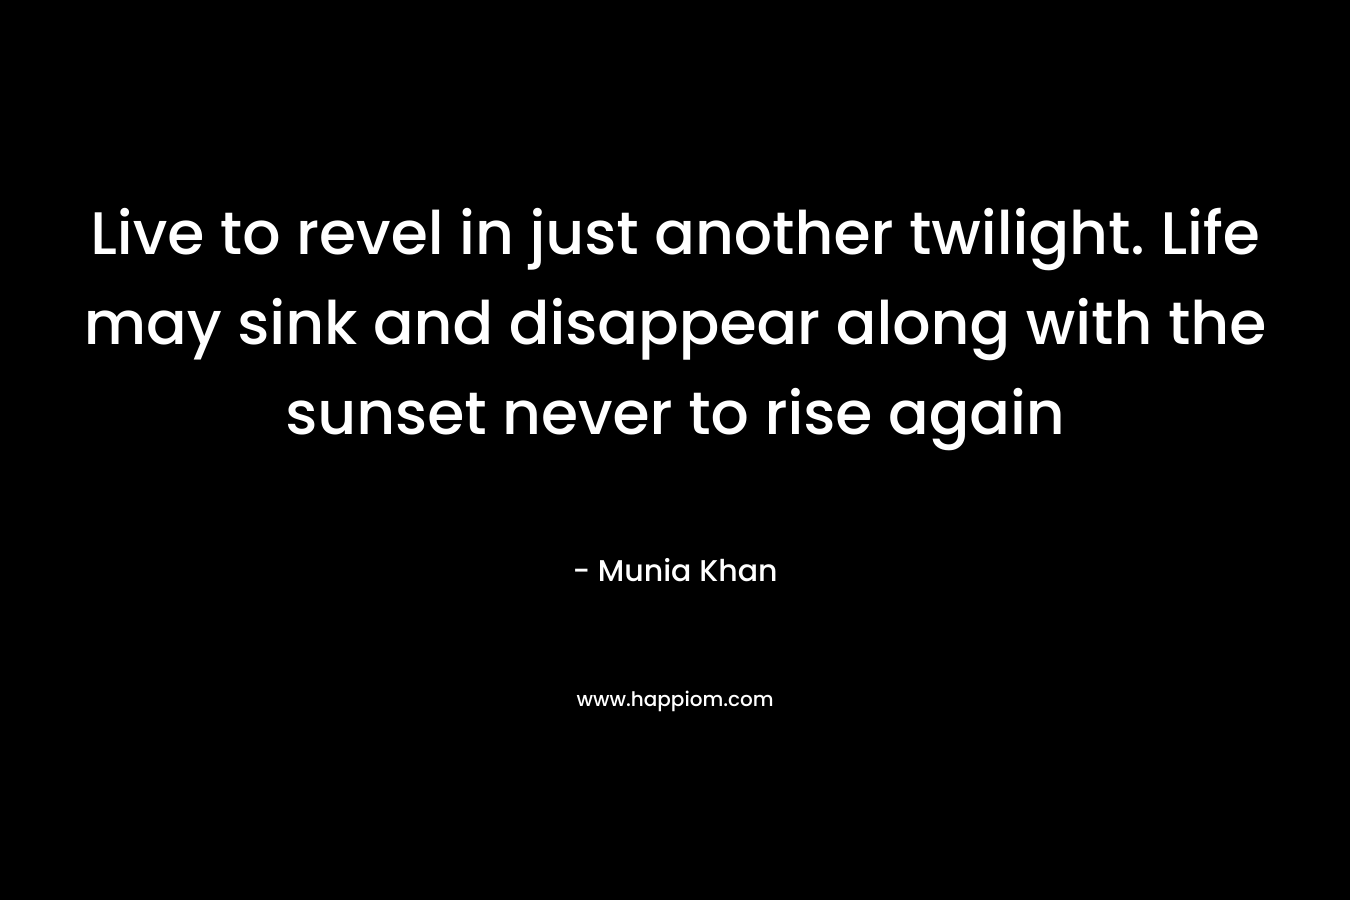 Live to revel in just another twilight. Life may sink and disappear along with the sunset never to rise again